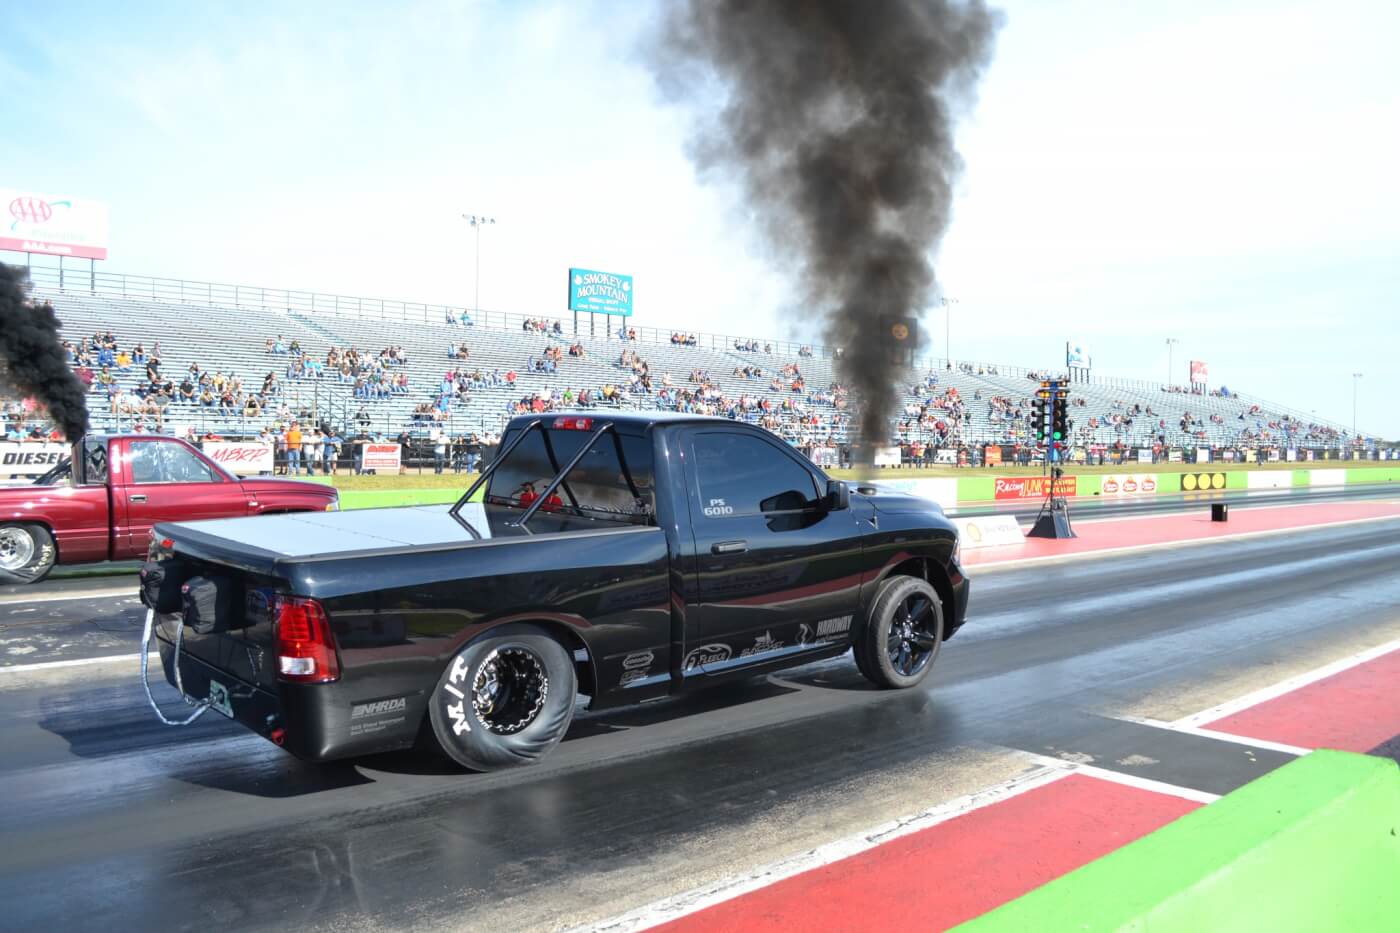 Probably the cleanest truck in attendance (racer or not), Ryan Milliken's Pro Street class Dodge went low 9's in the quarter before having transmission issues.